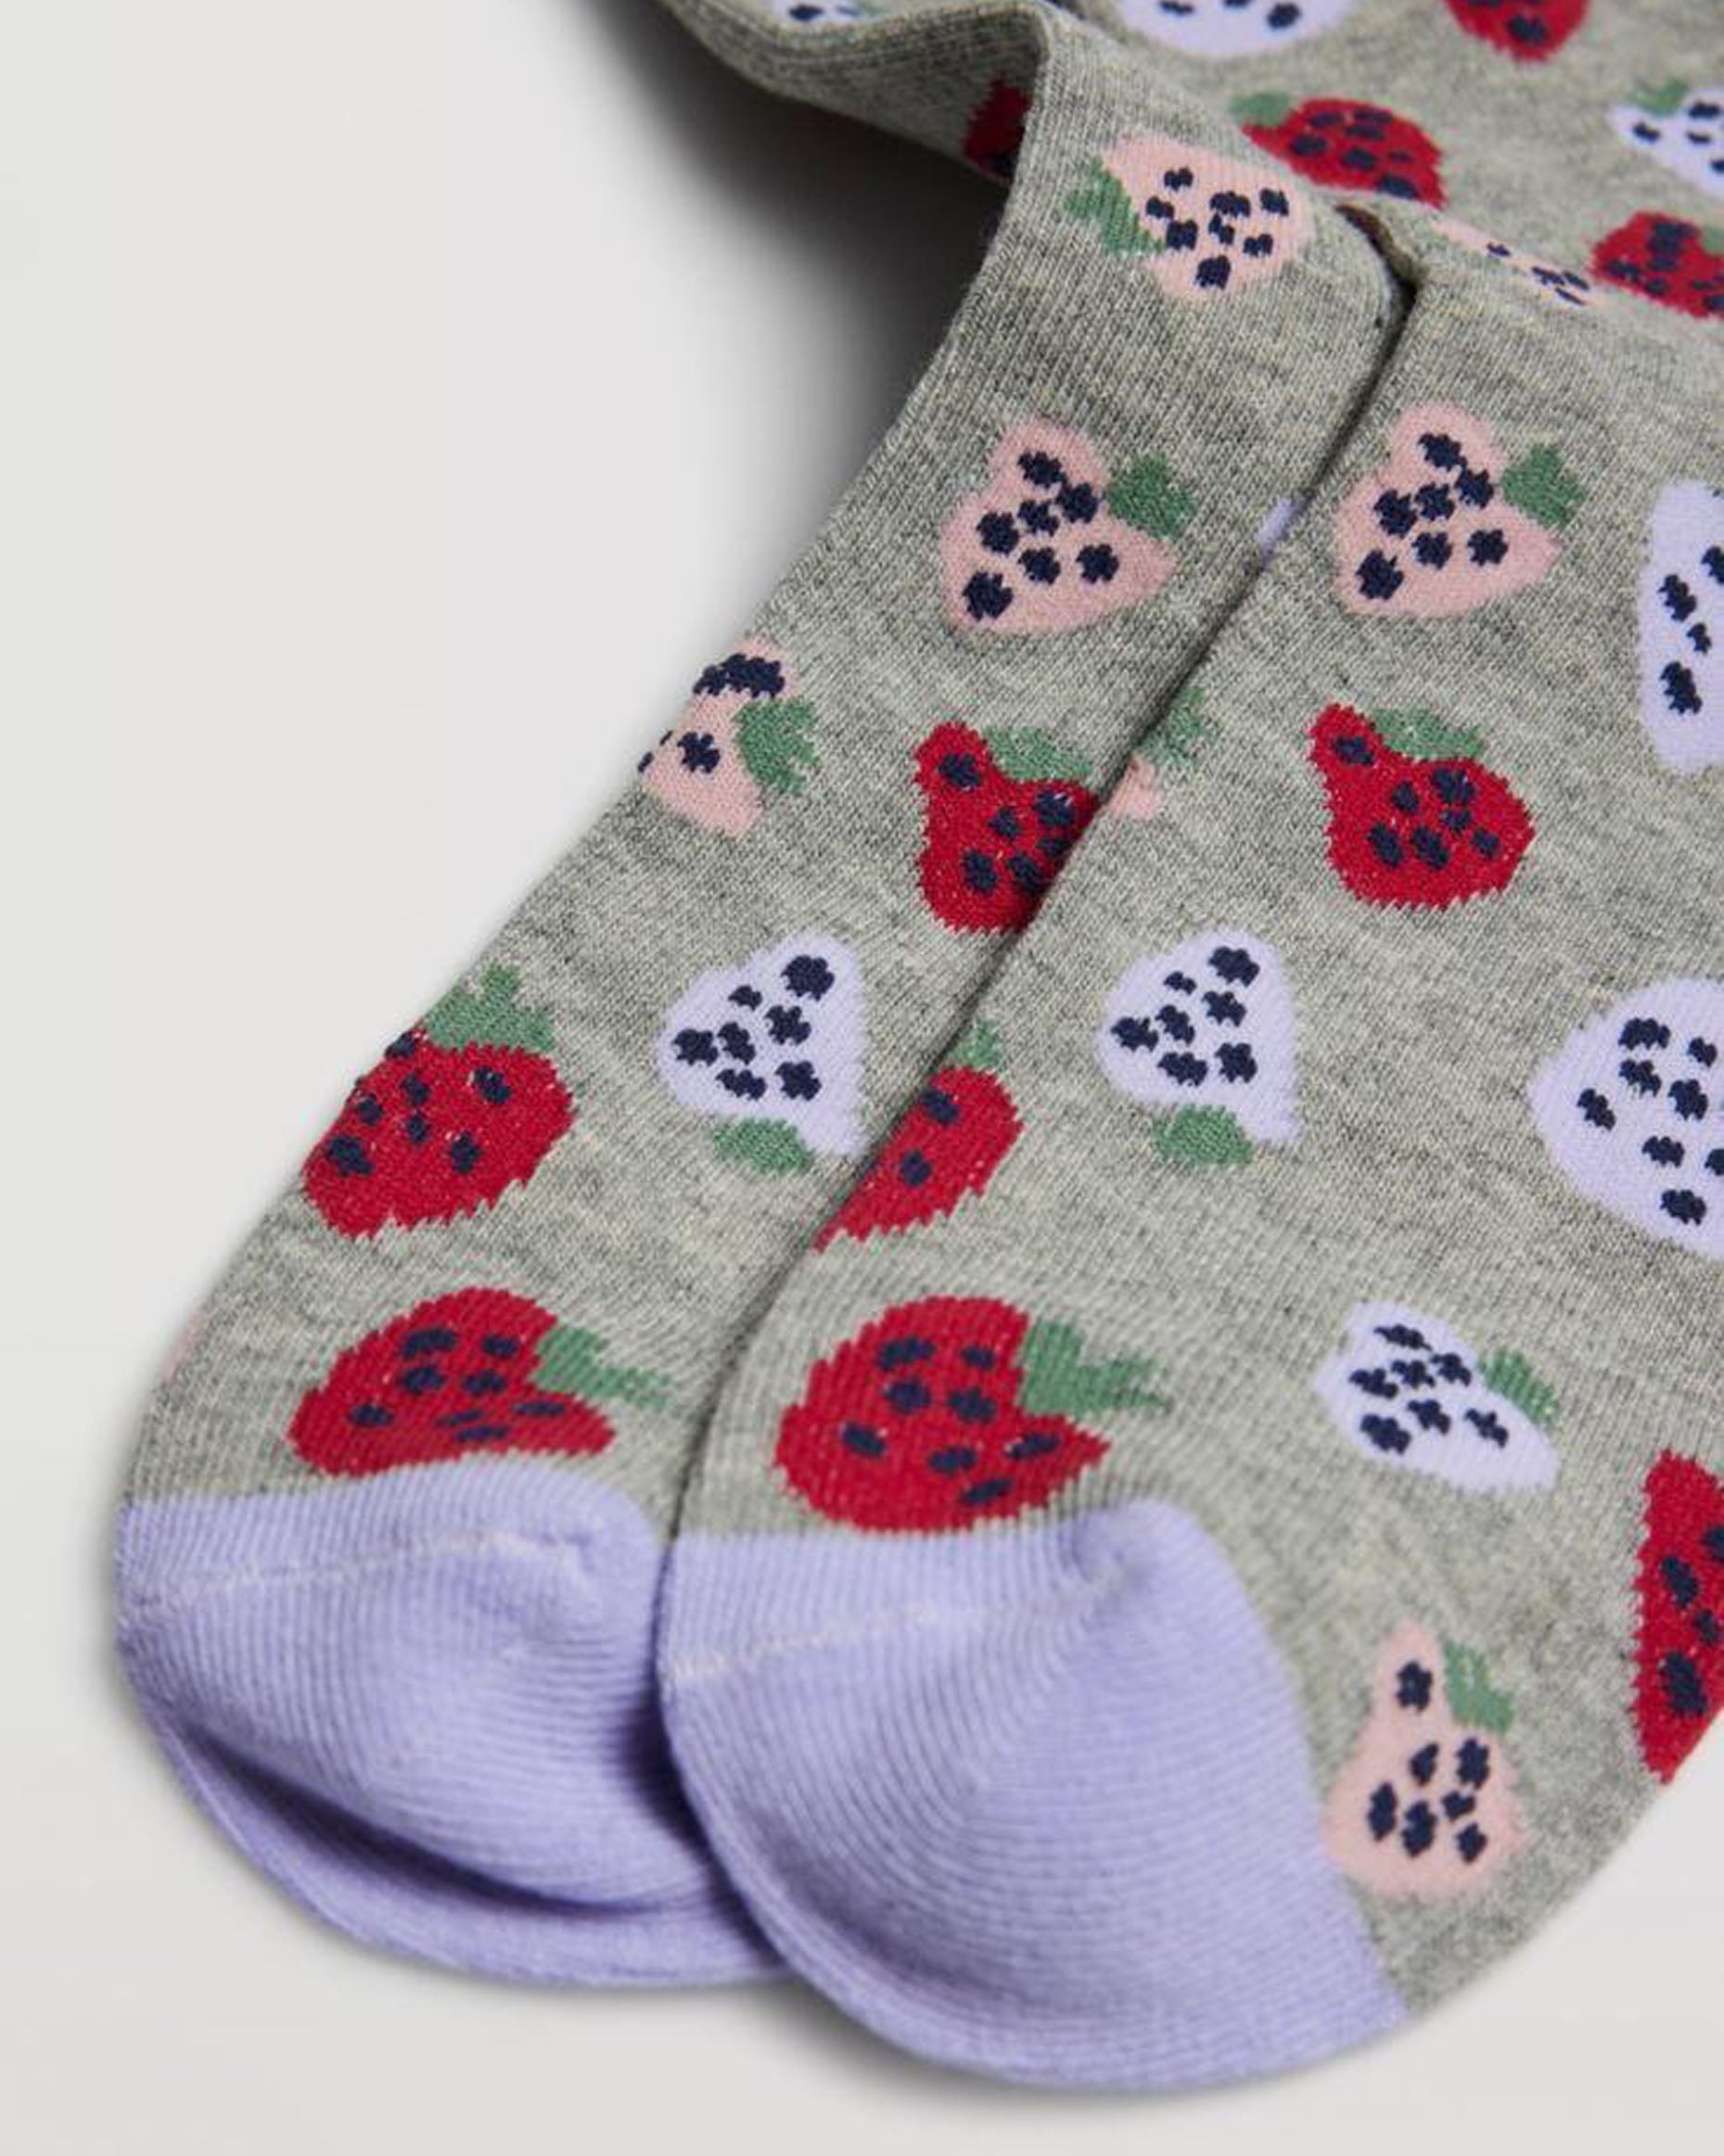 Ysabel Mora 12881 Strawberry Socks - Light grey cotton socks with an all over strawberry style pattern in red, pale pink, blue, sage green and navy with a lilac toe and heel and no cuff.